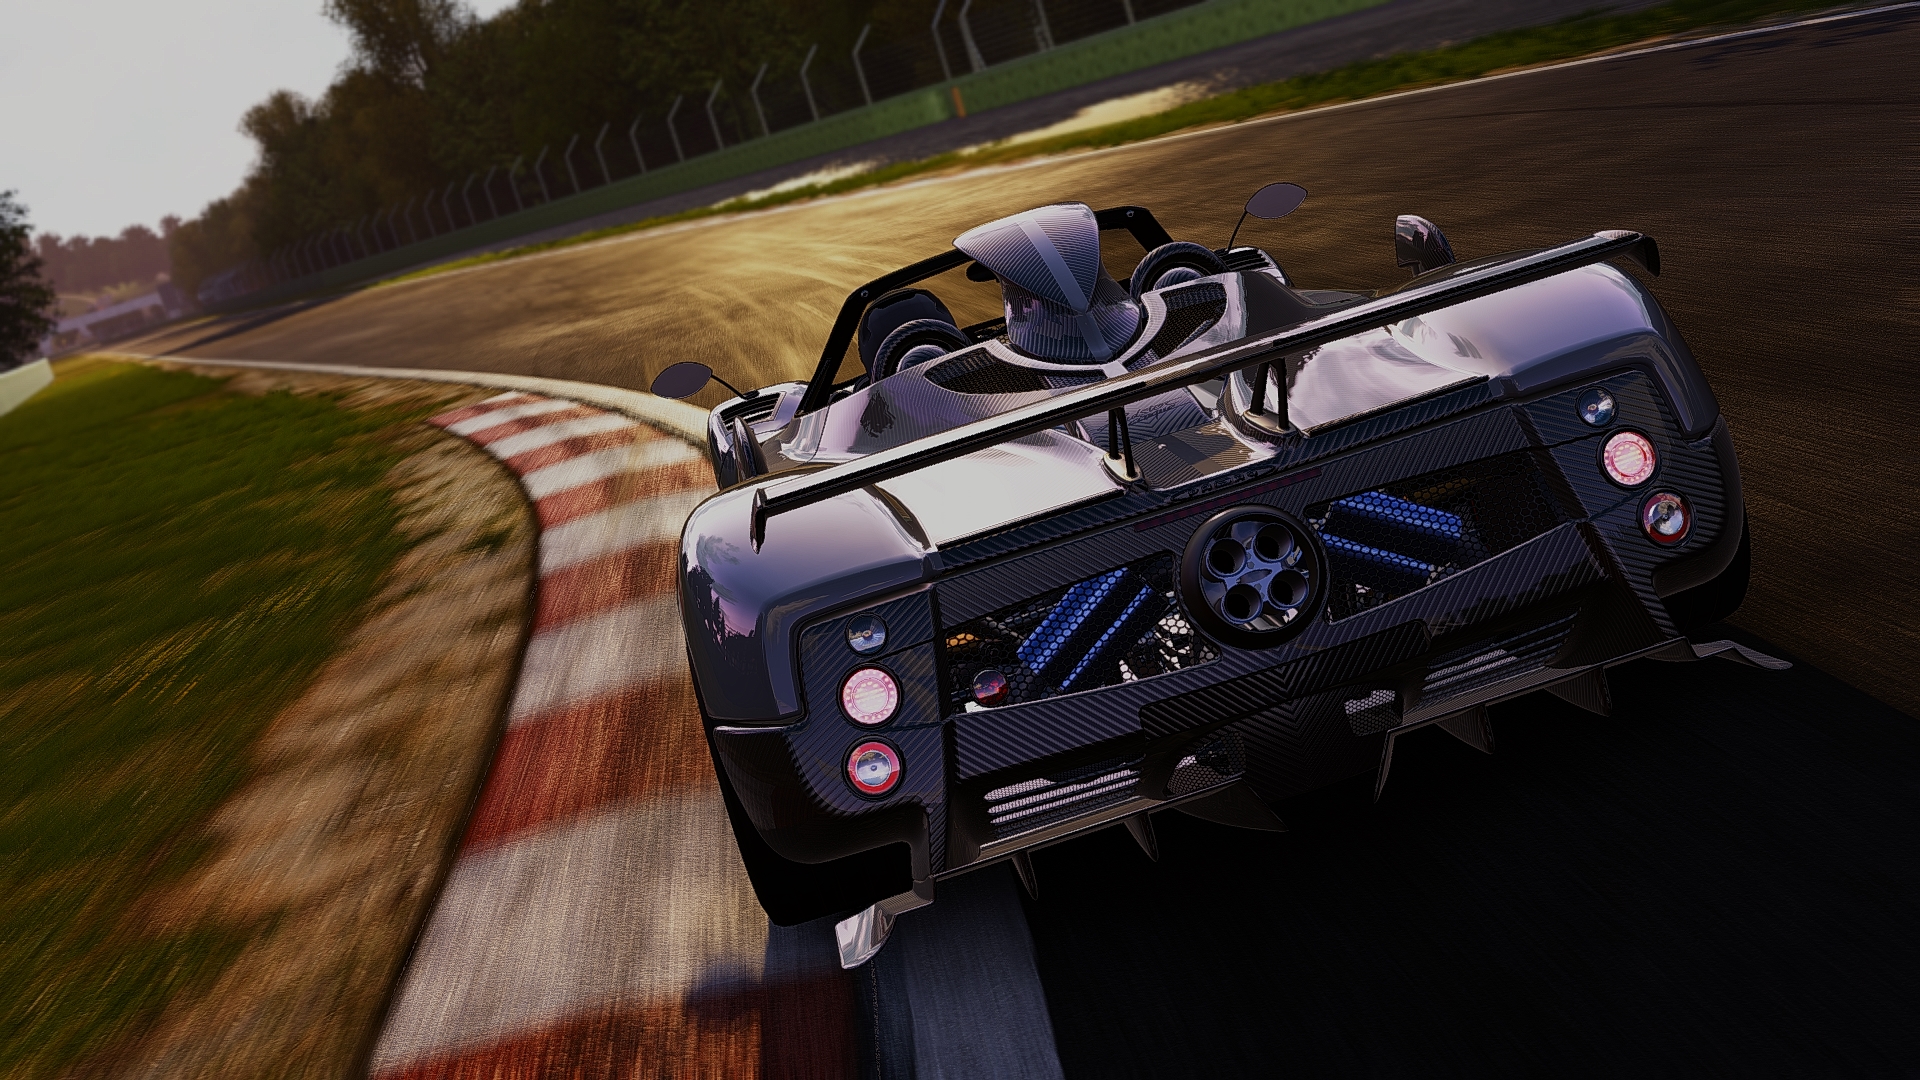 Project CARS’ Visuals Put Every Other Racing Game To Shame, New Screenshots